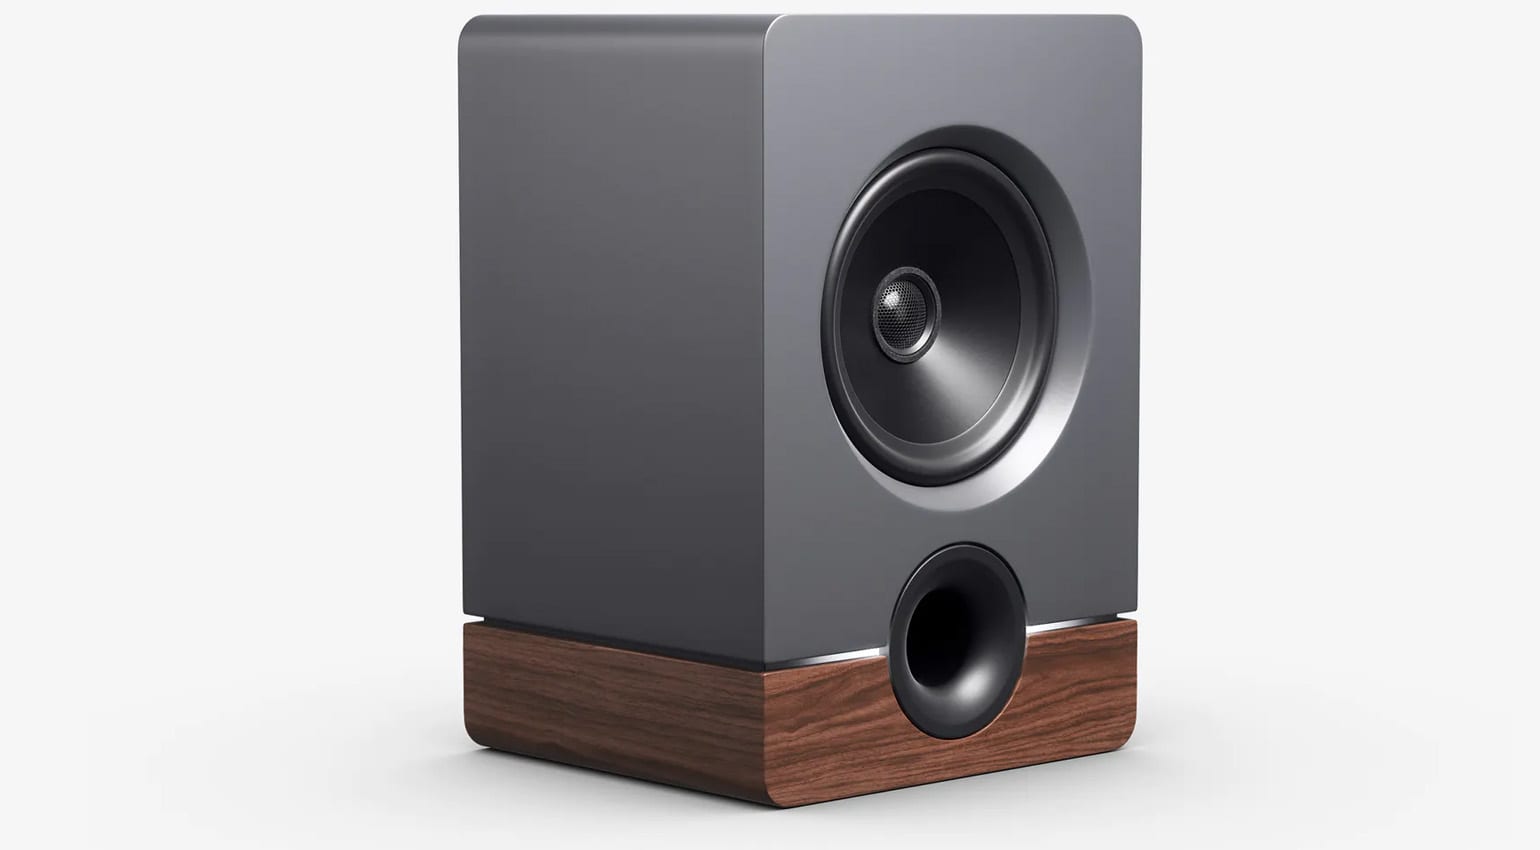 NAMM 2021: Output Frontier studio monitors emerge from vaporware